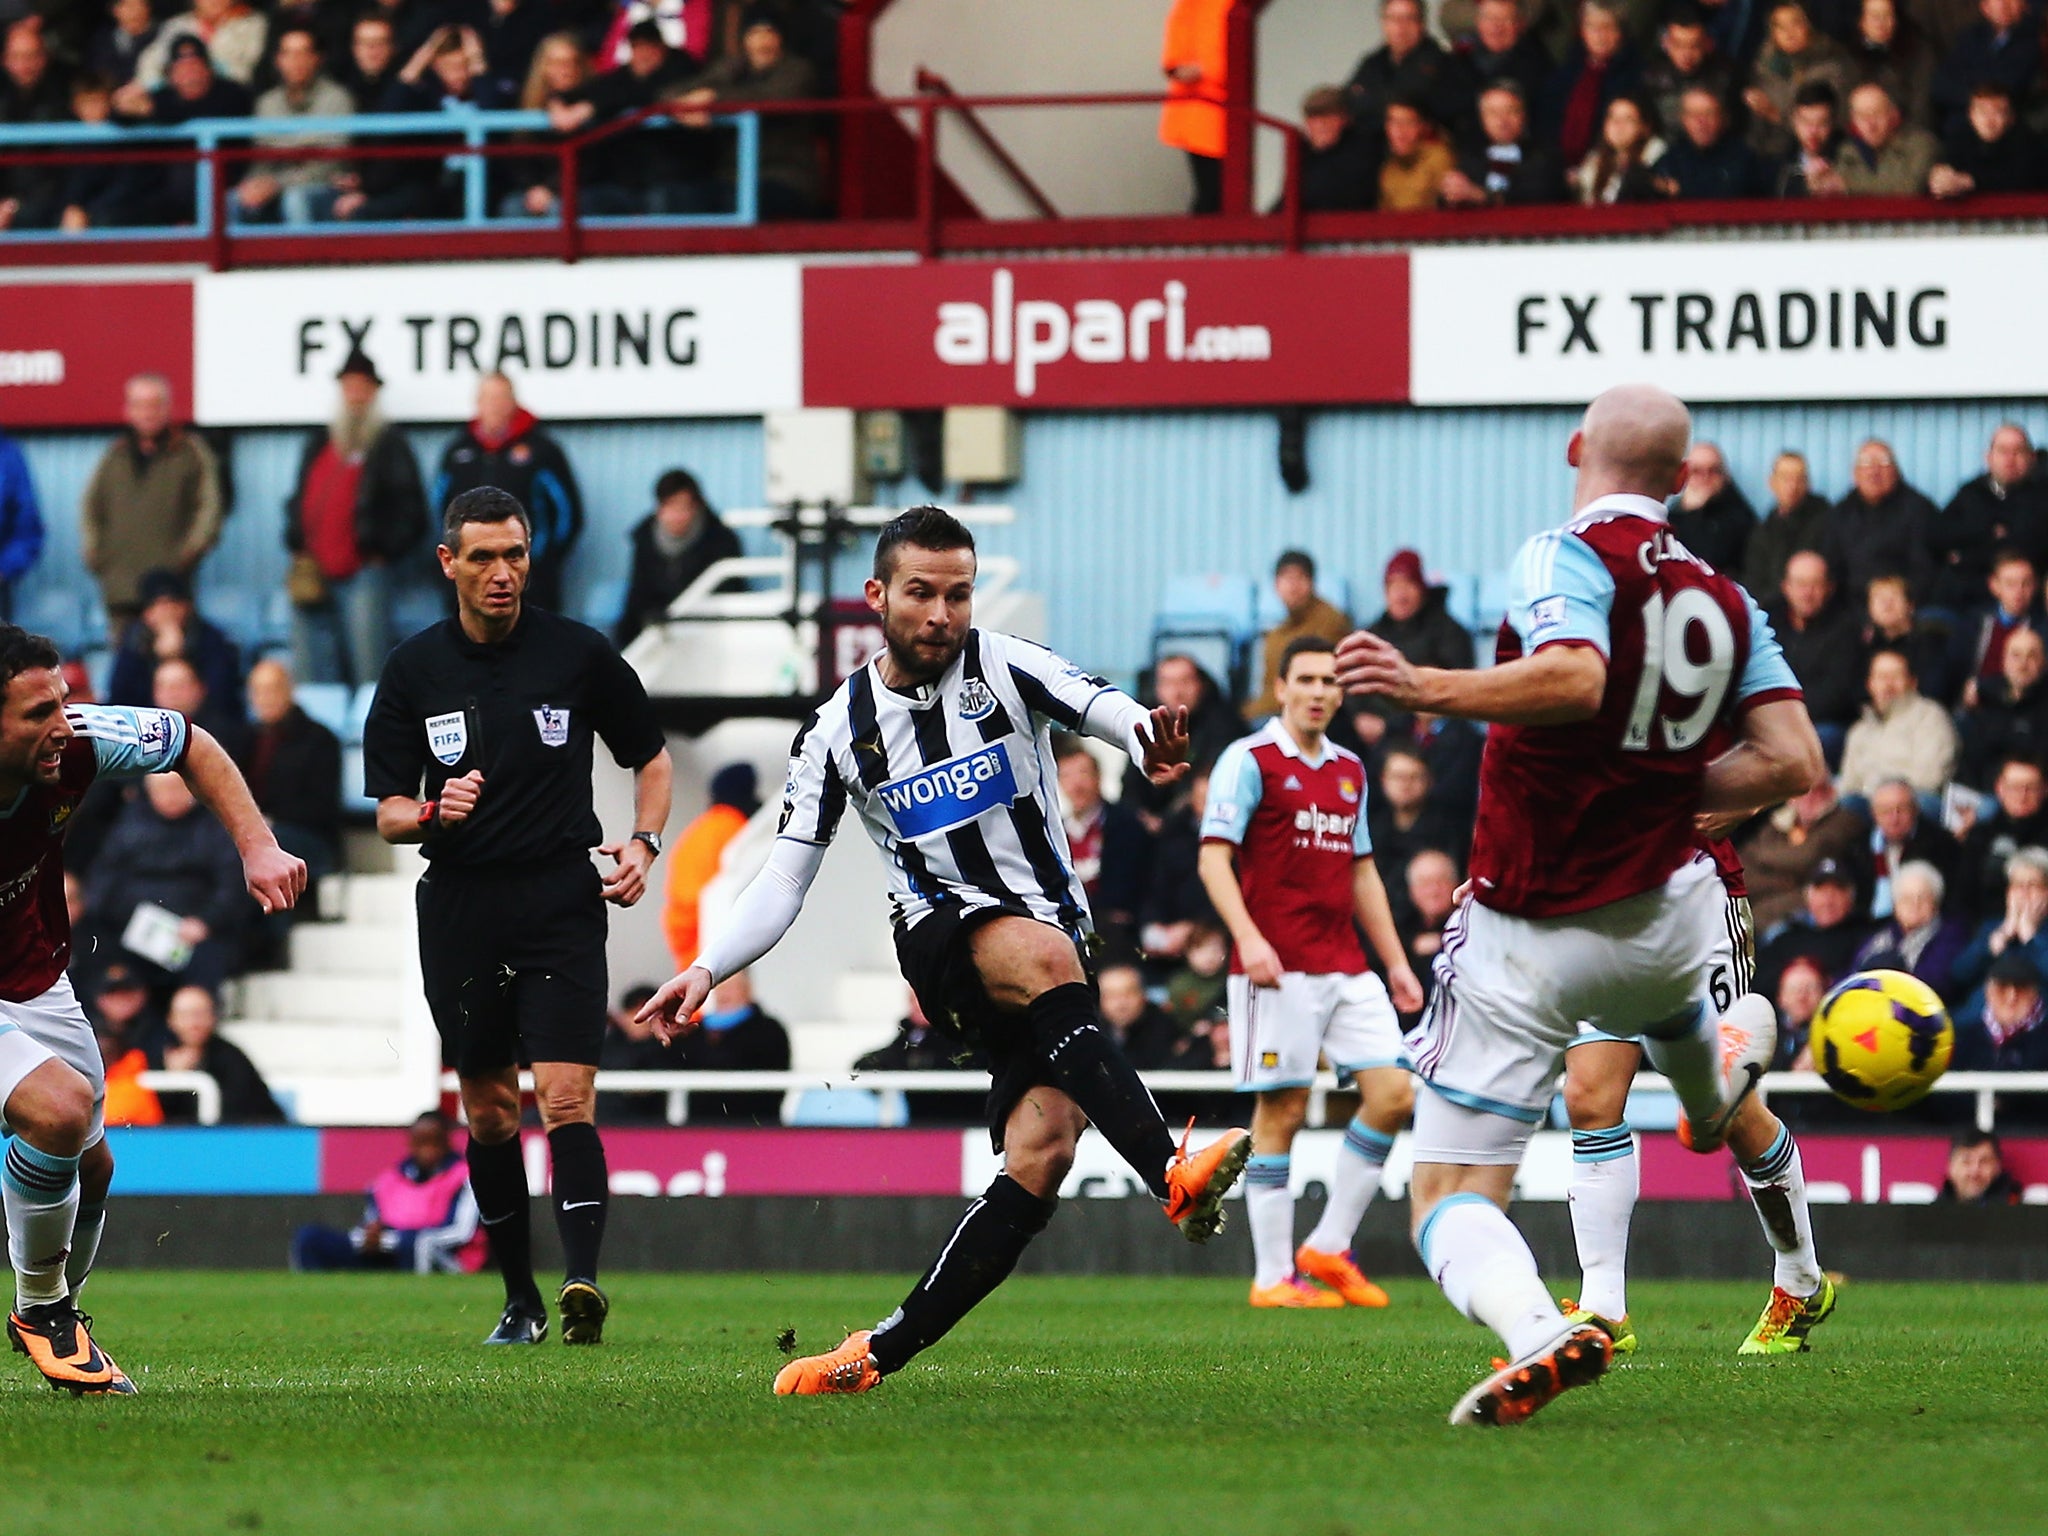 Yohan Cabaye scores against West Ham in Newcastle's 3-1 Premier League victory